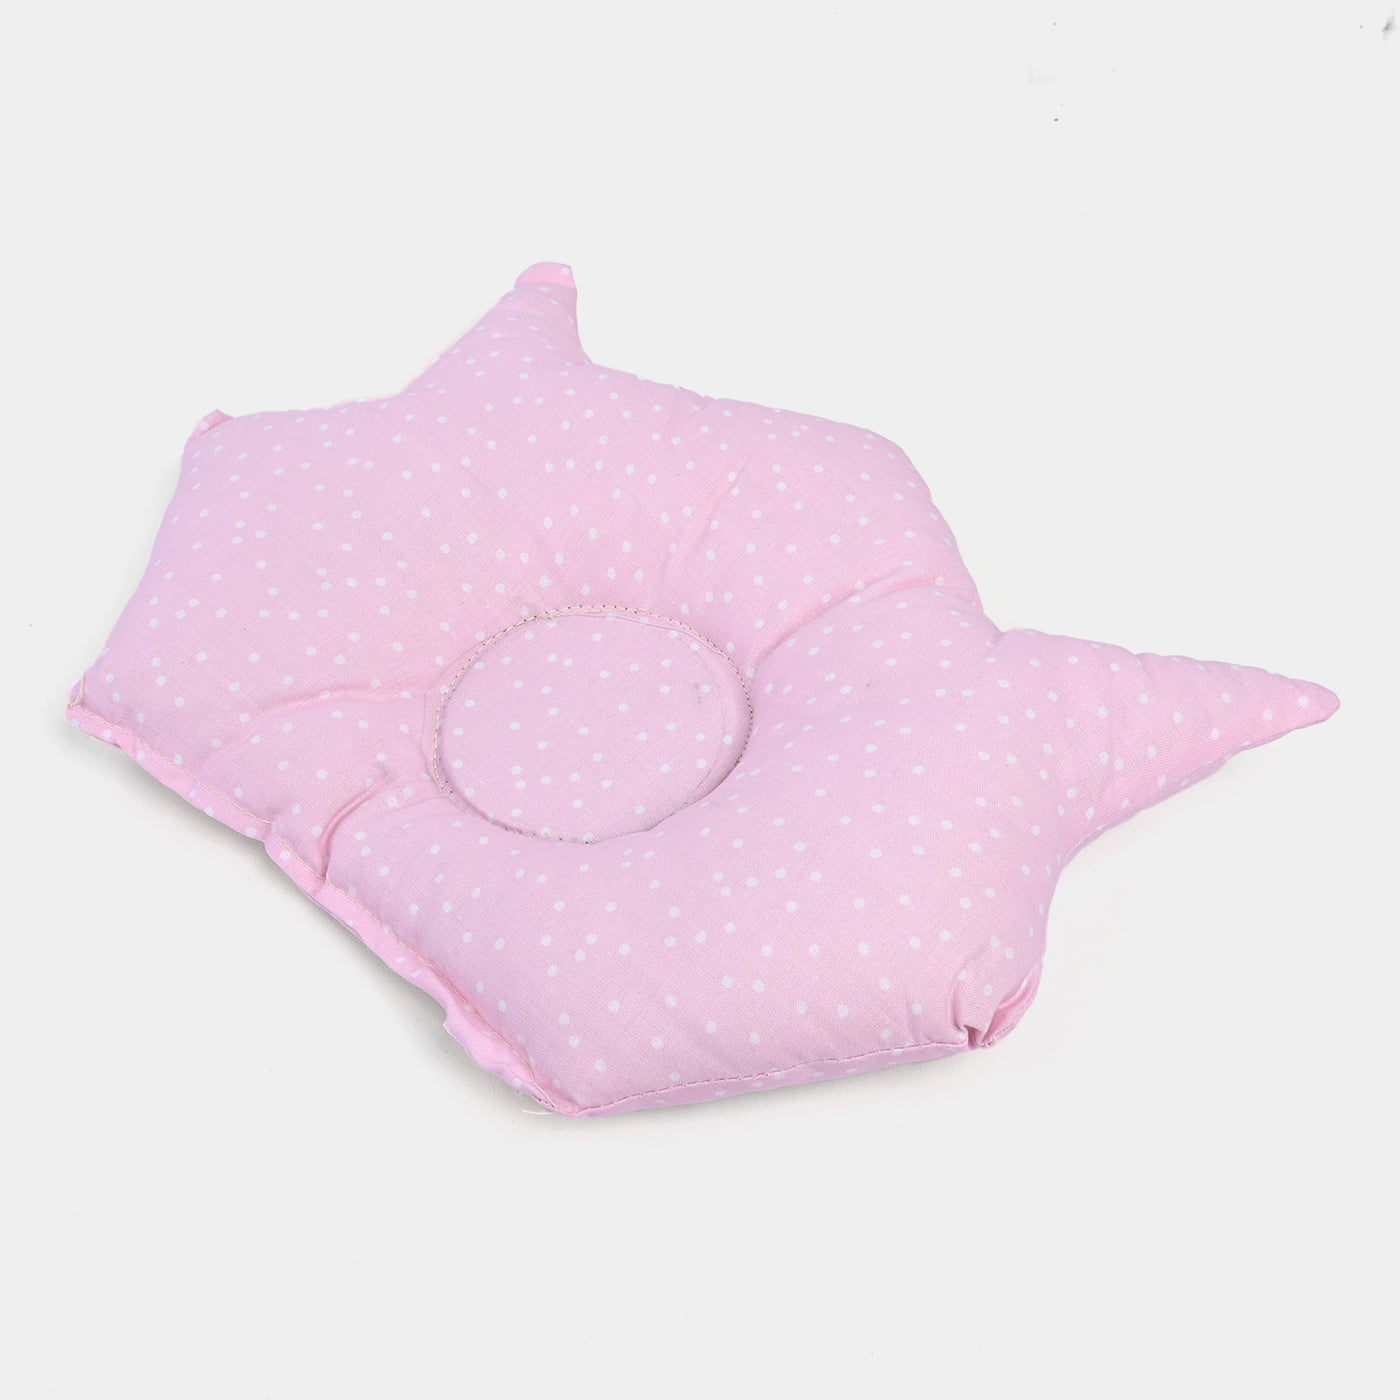 Little Baby Crown Pillow